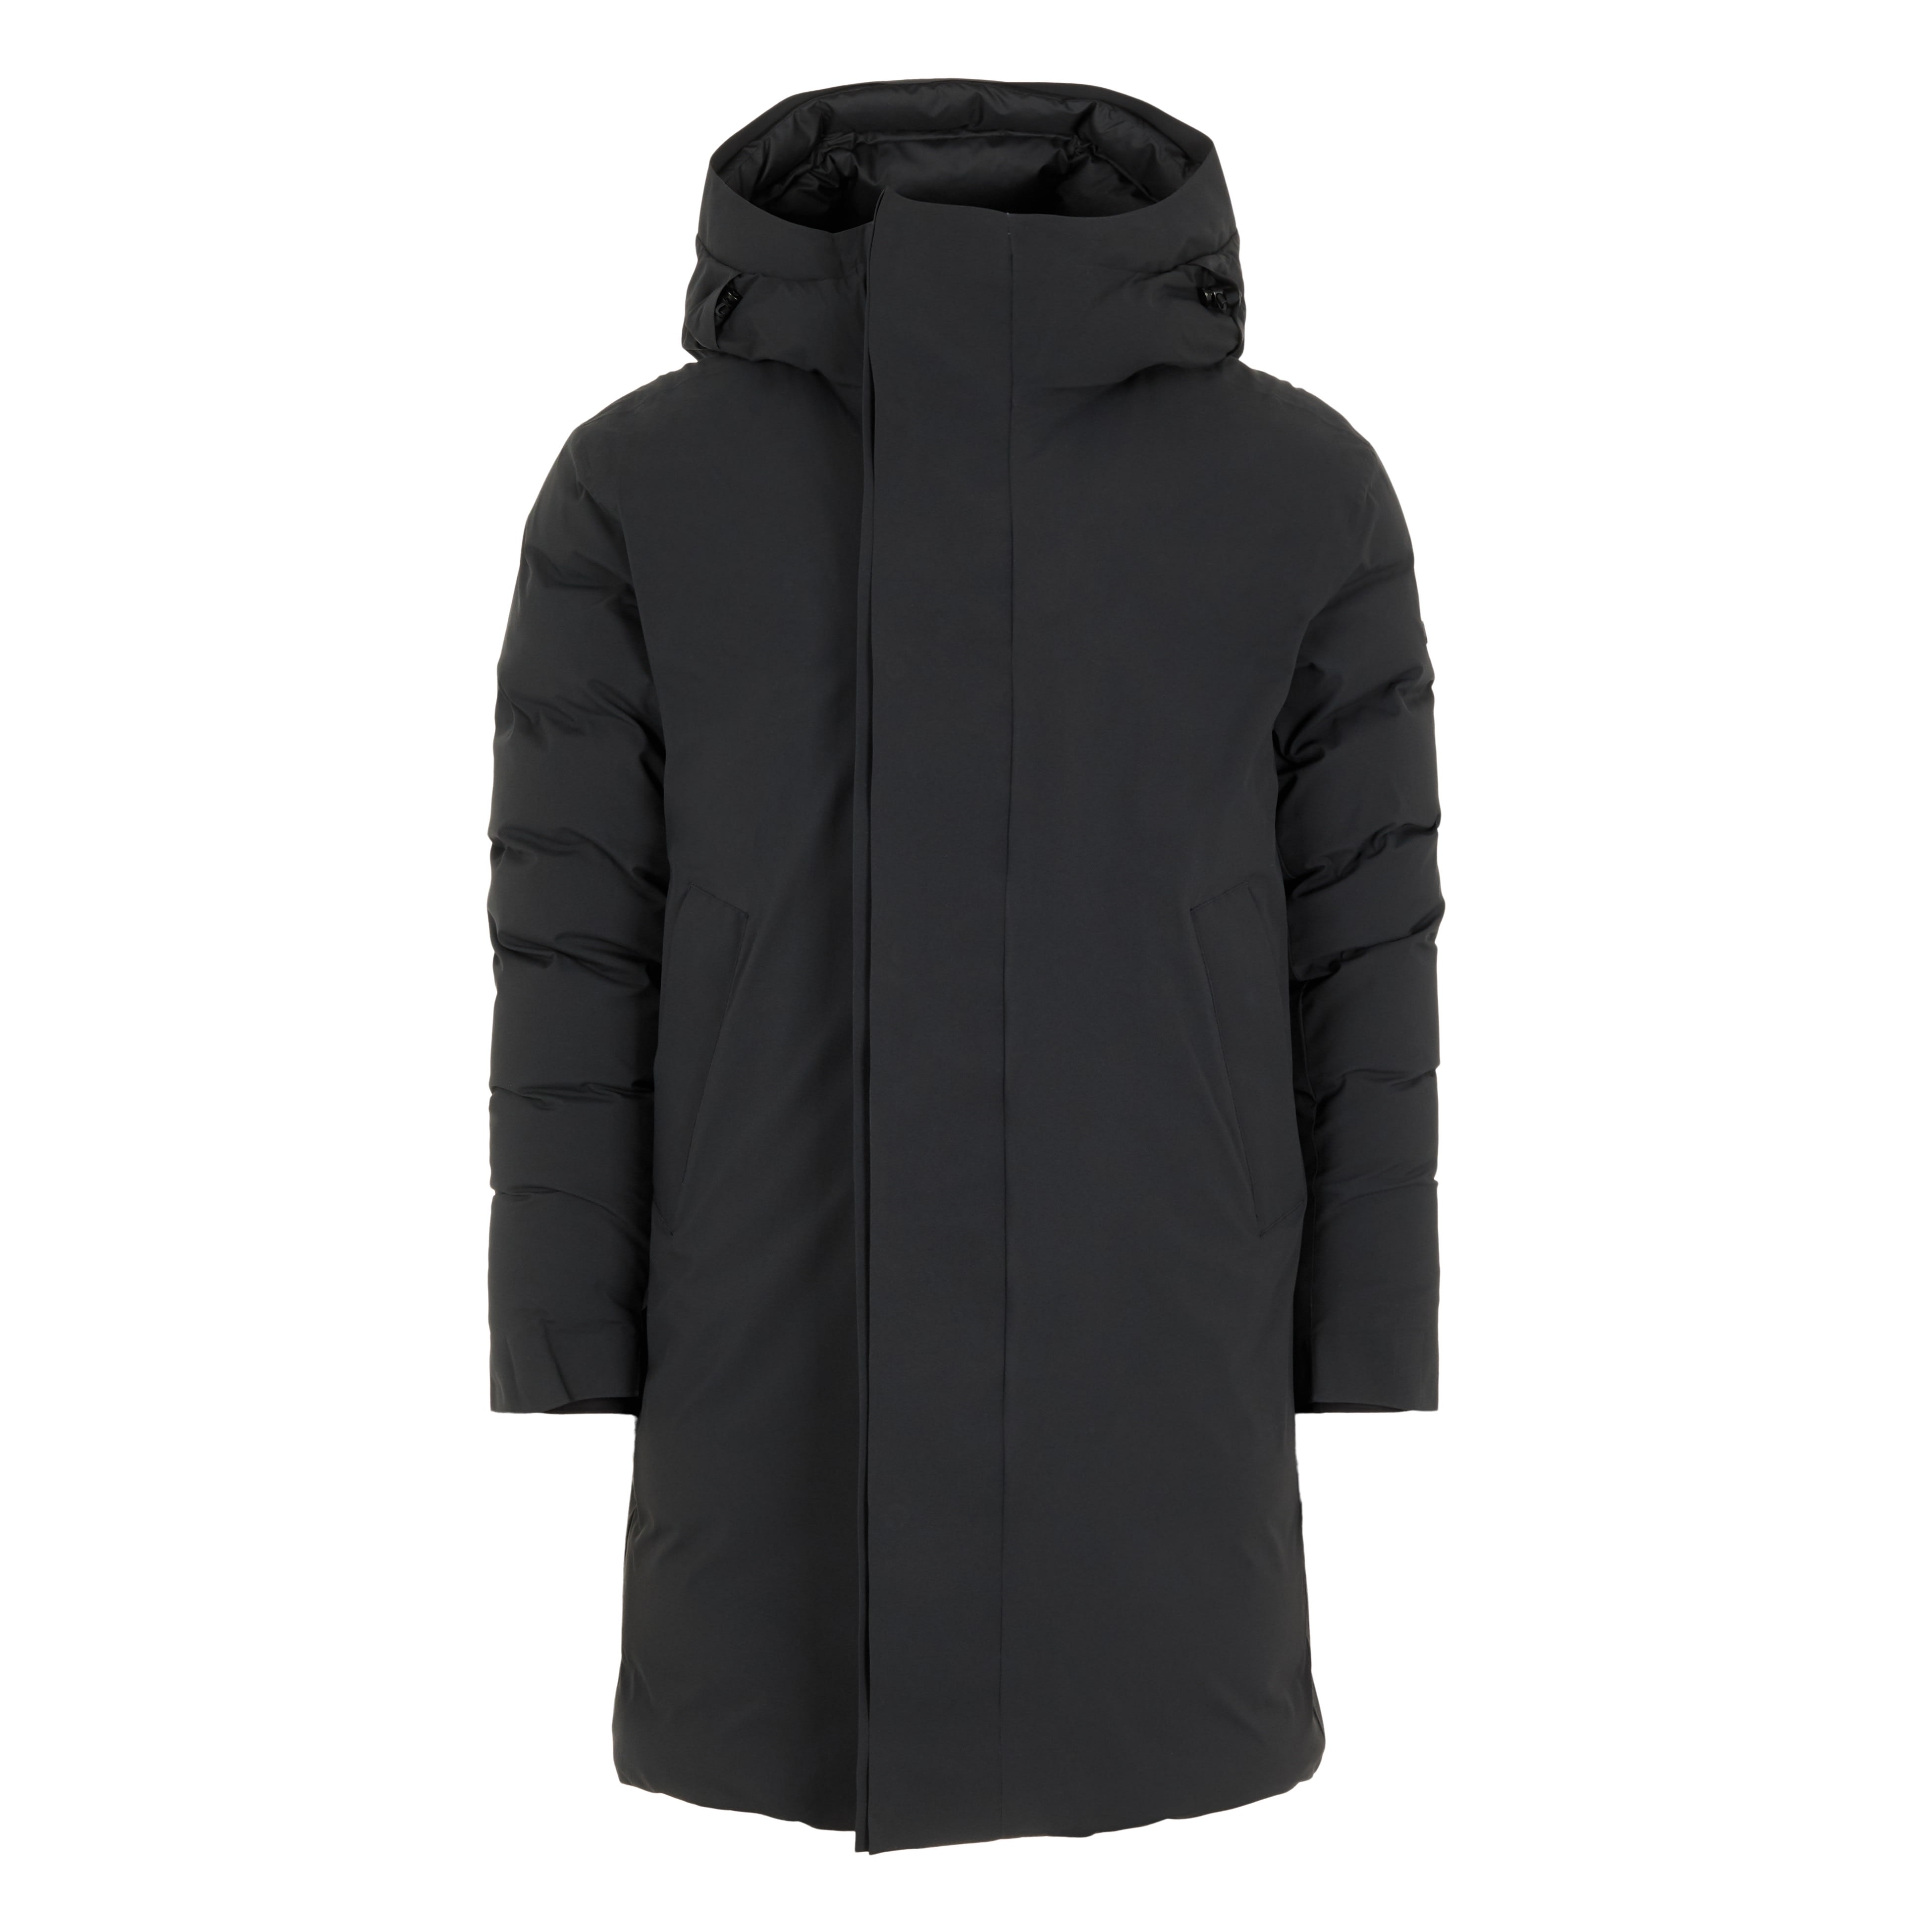 Buy J.Lindeberg Men's Active Down Parka from Outnorth